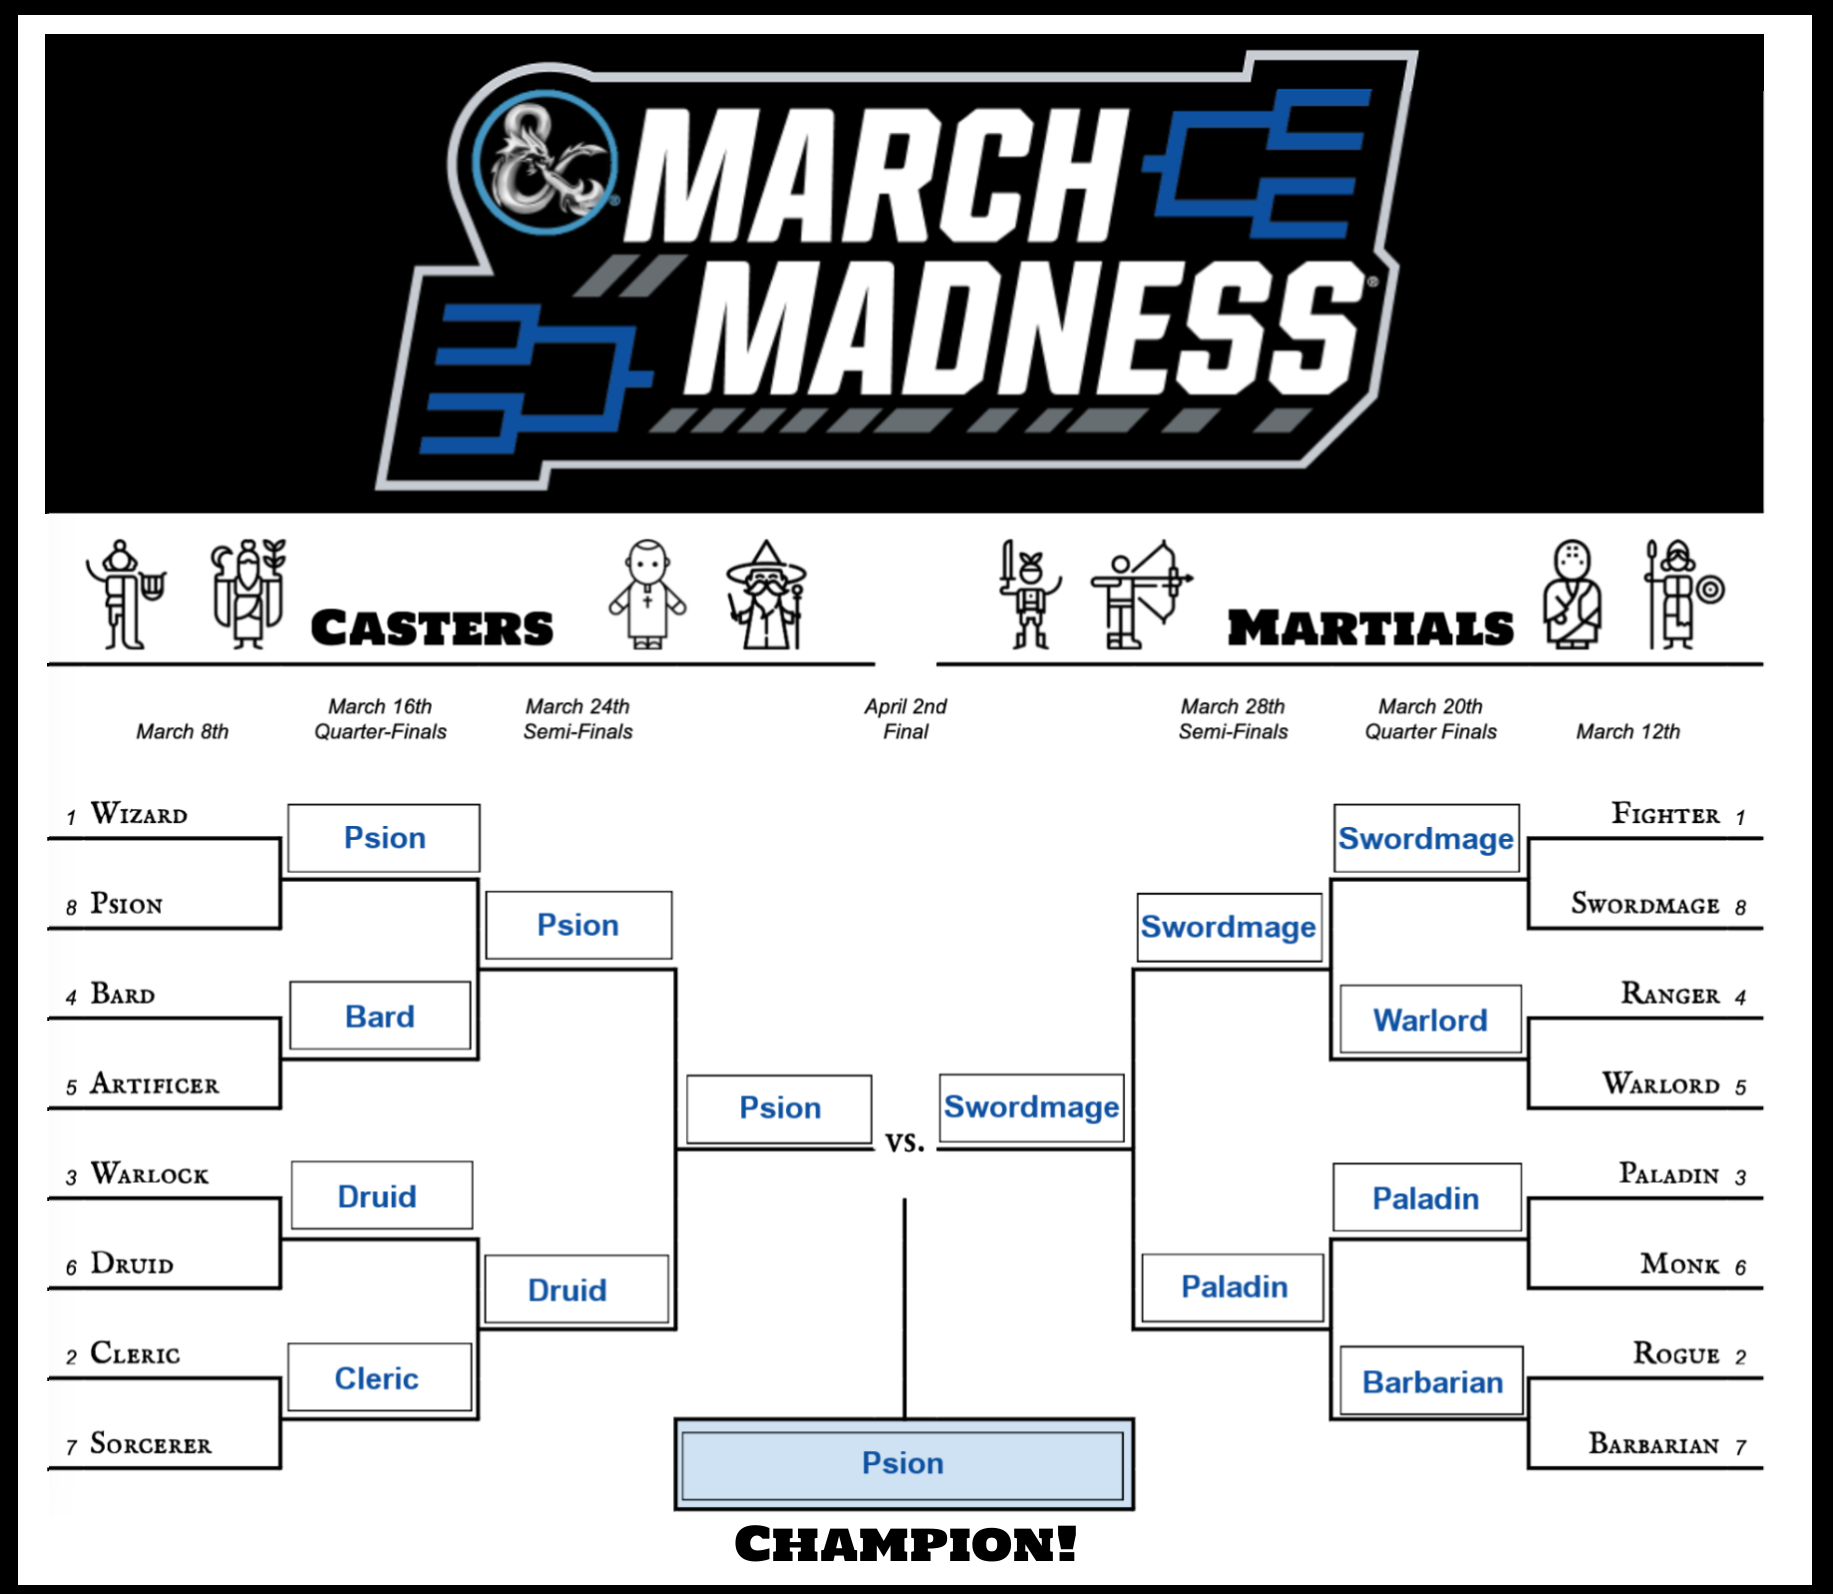 Yaarel March Madness Classes.png